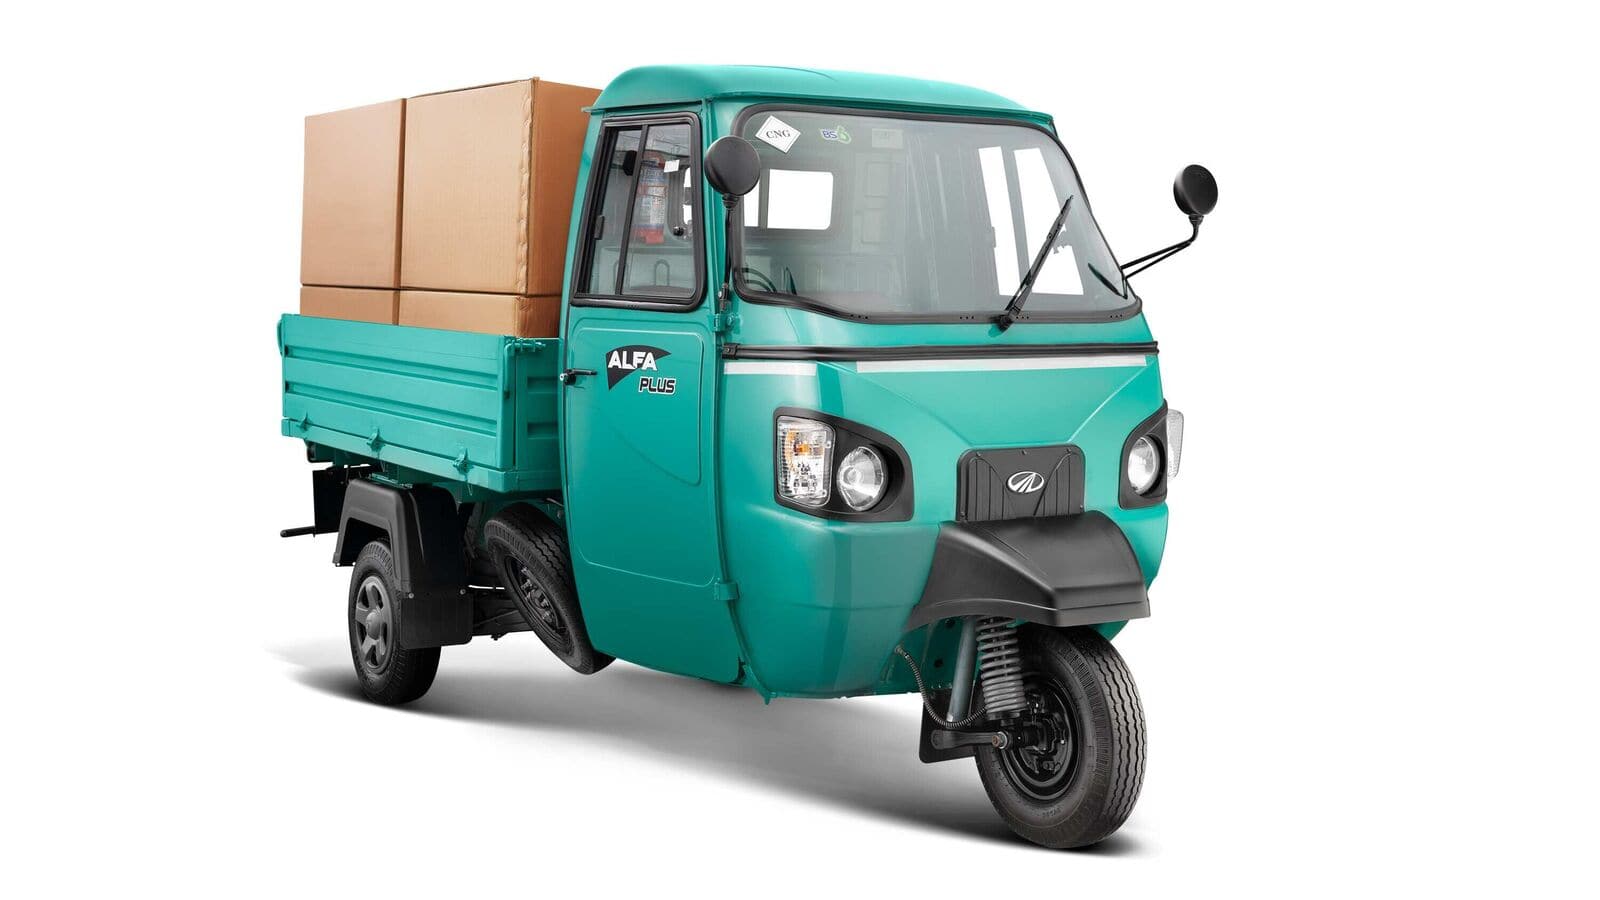 Mahindra launches new Alfa CNG passenger and cargo variants. Details | Mint